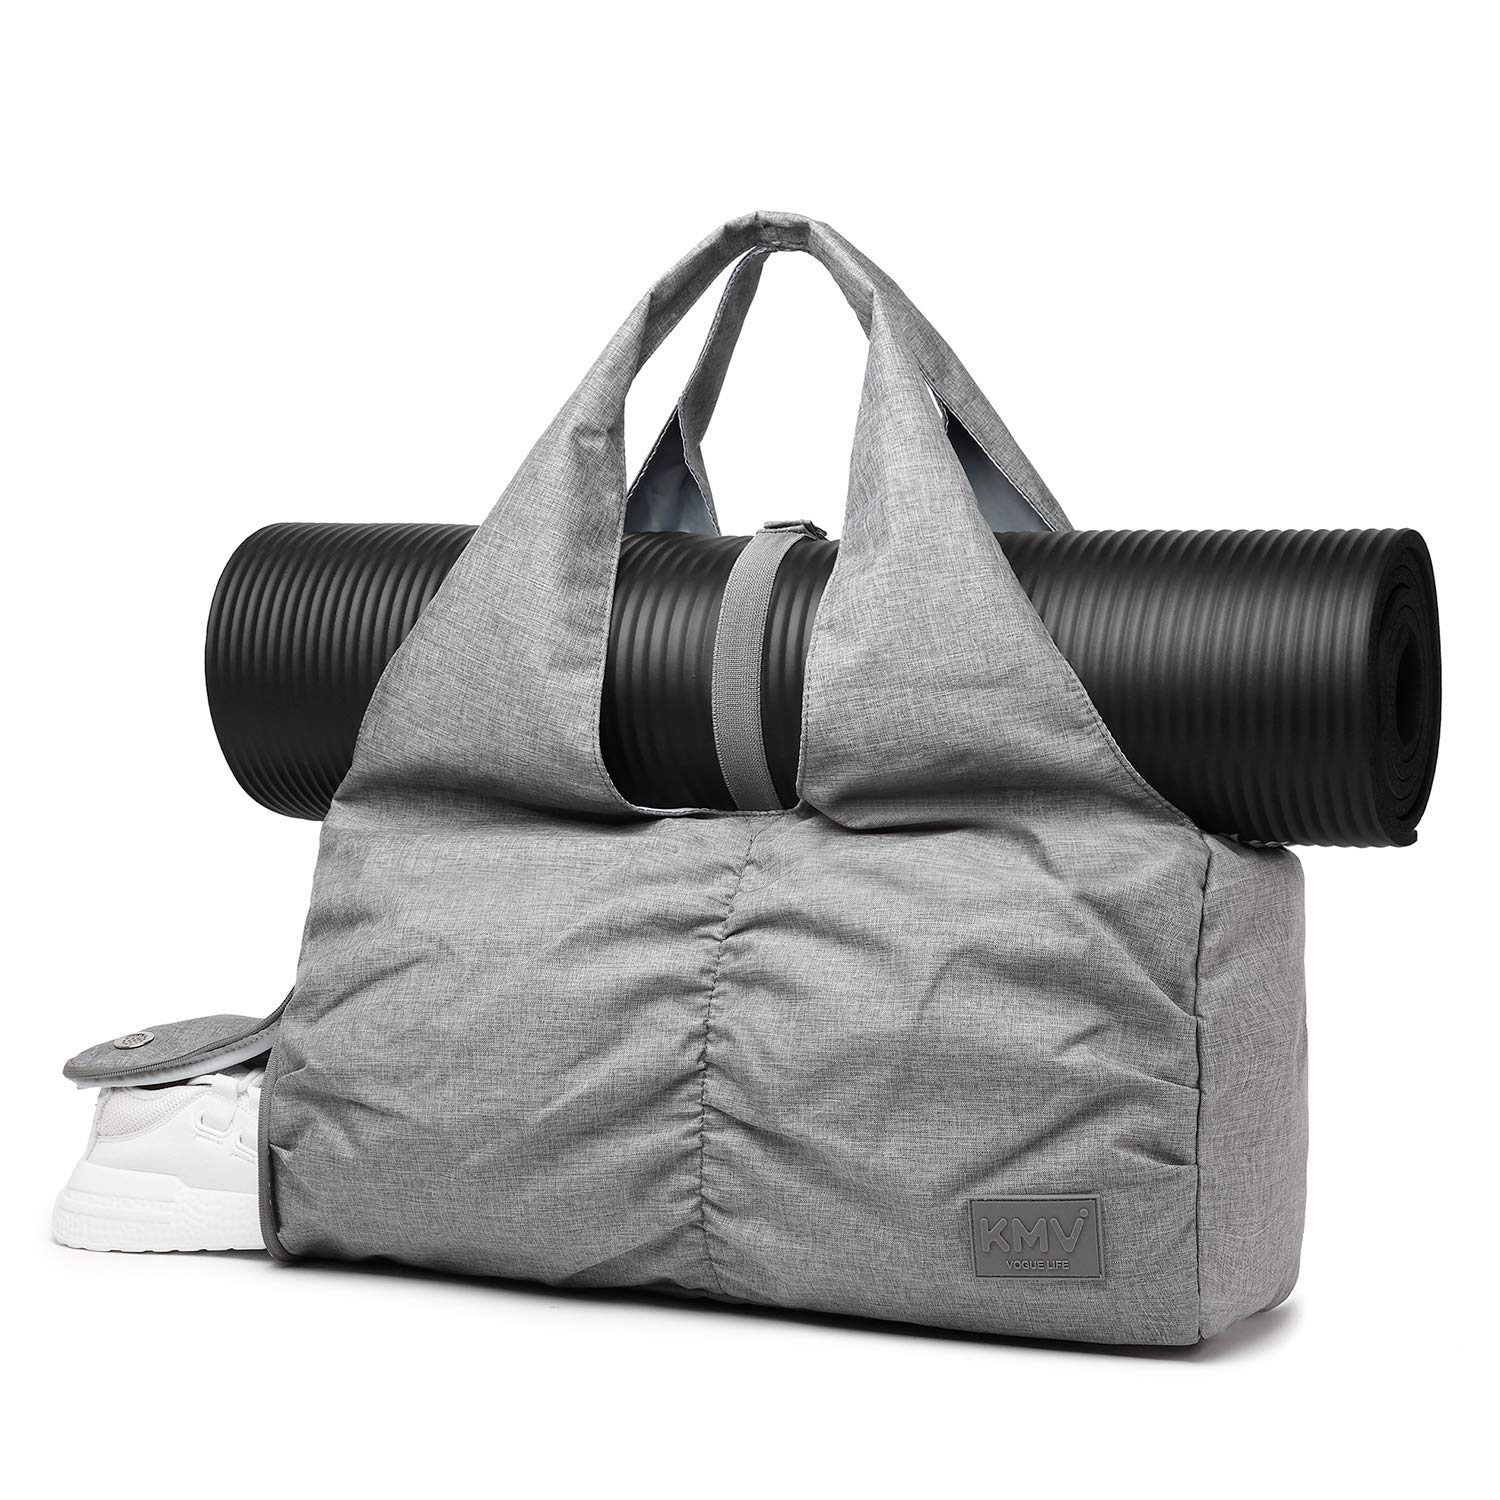 Travel Yoga Gym Bag for Women, Carrying Workout Gear, Makeup, and  Accessories, Shoe Compartment and Wet Dry Storage Pockets Grey Medium